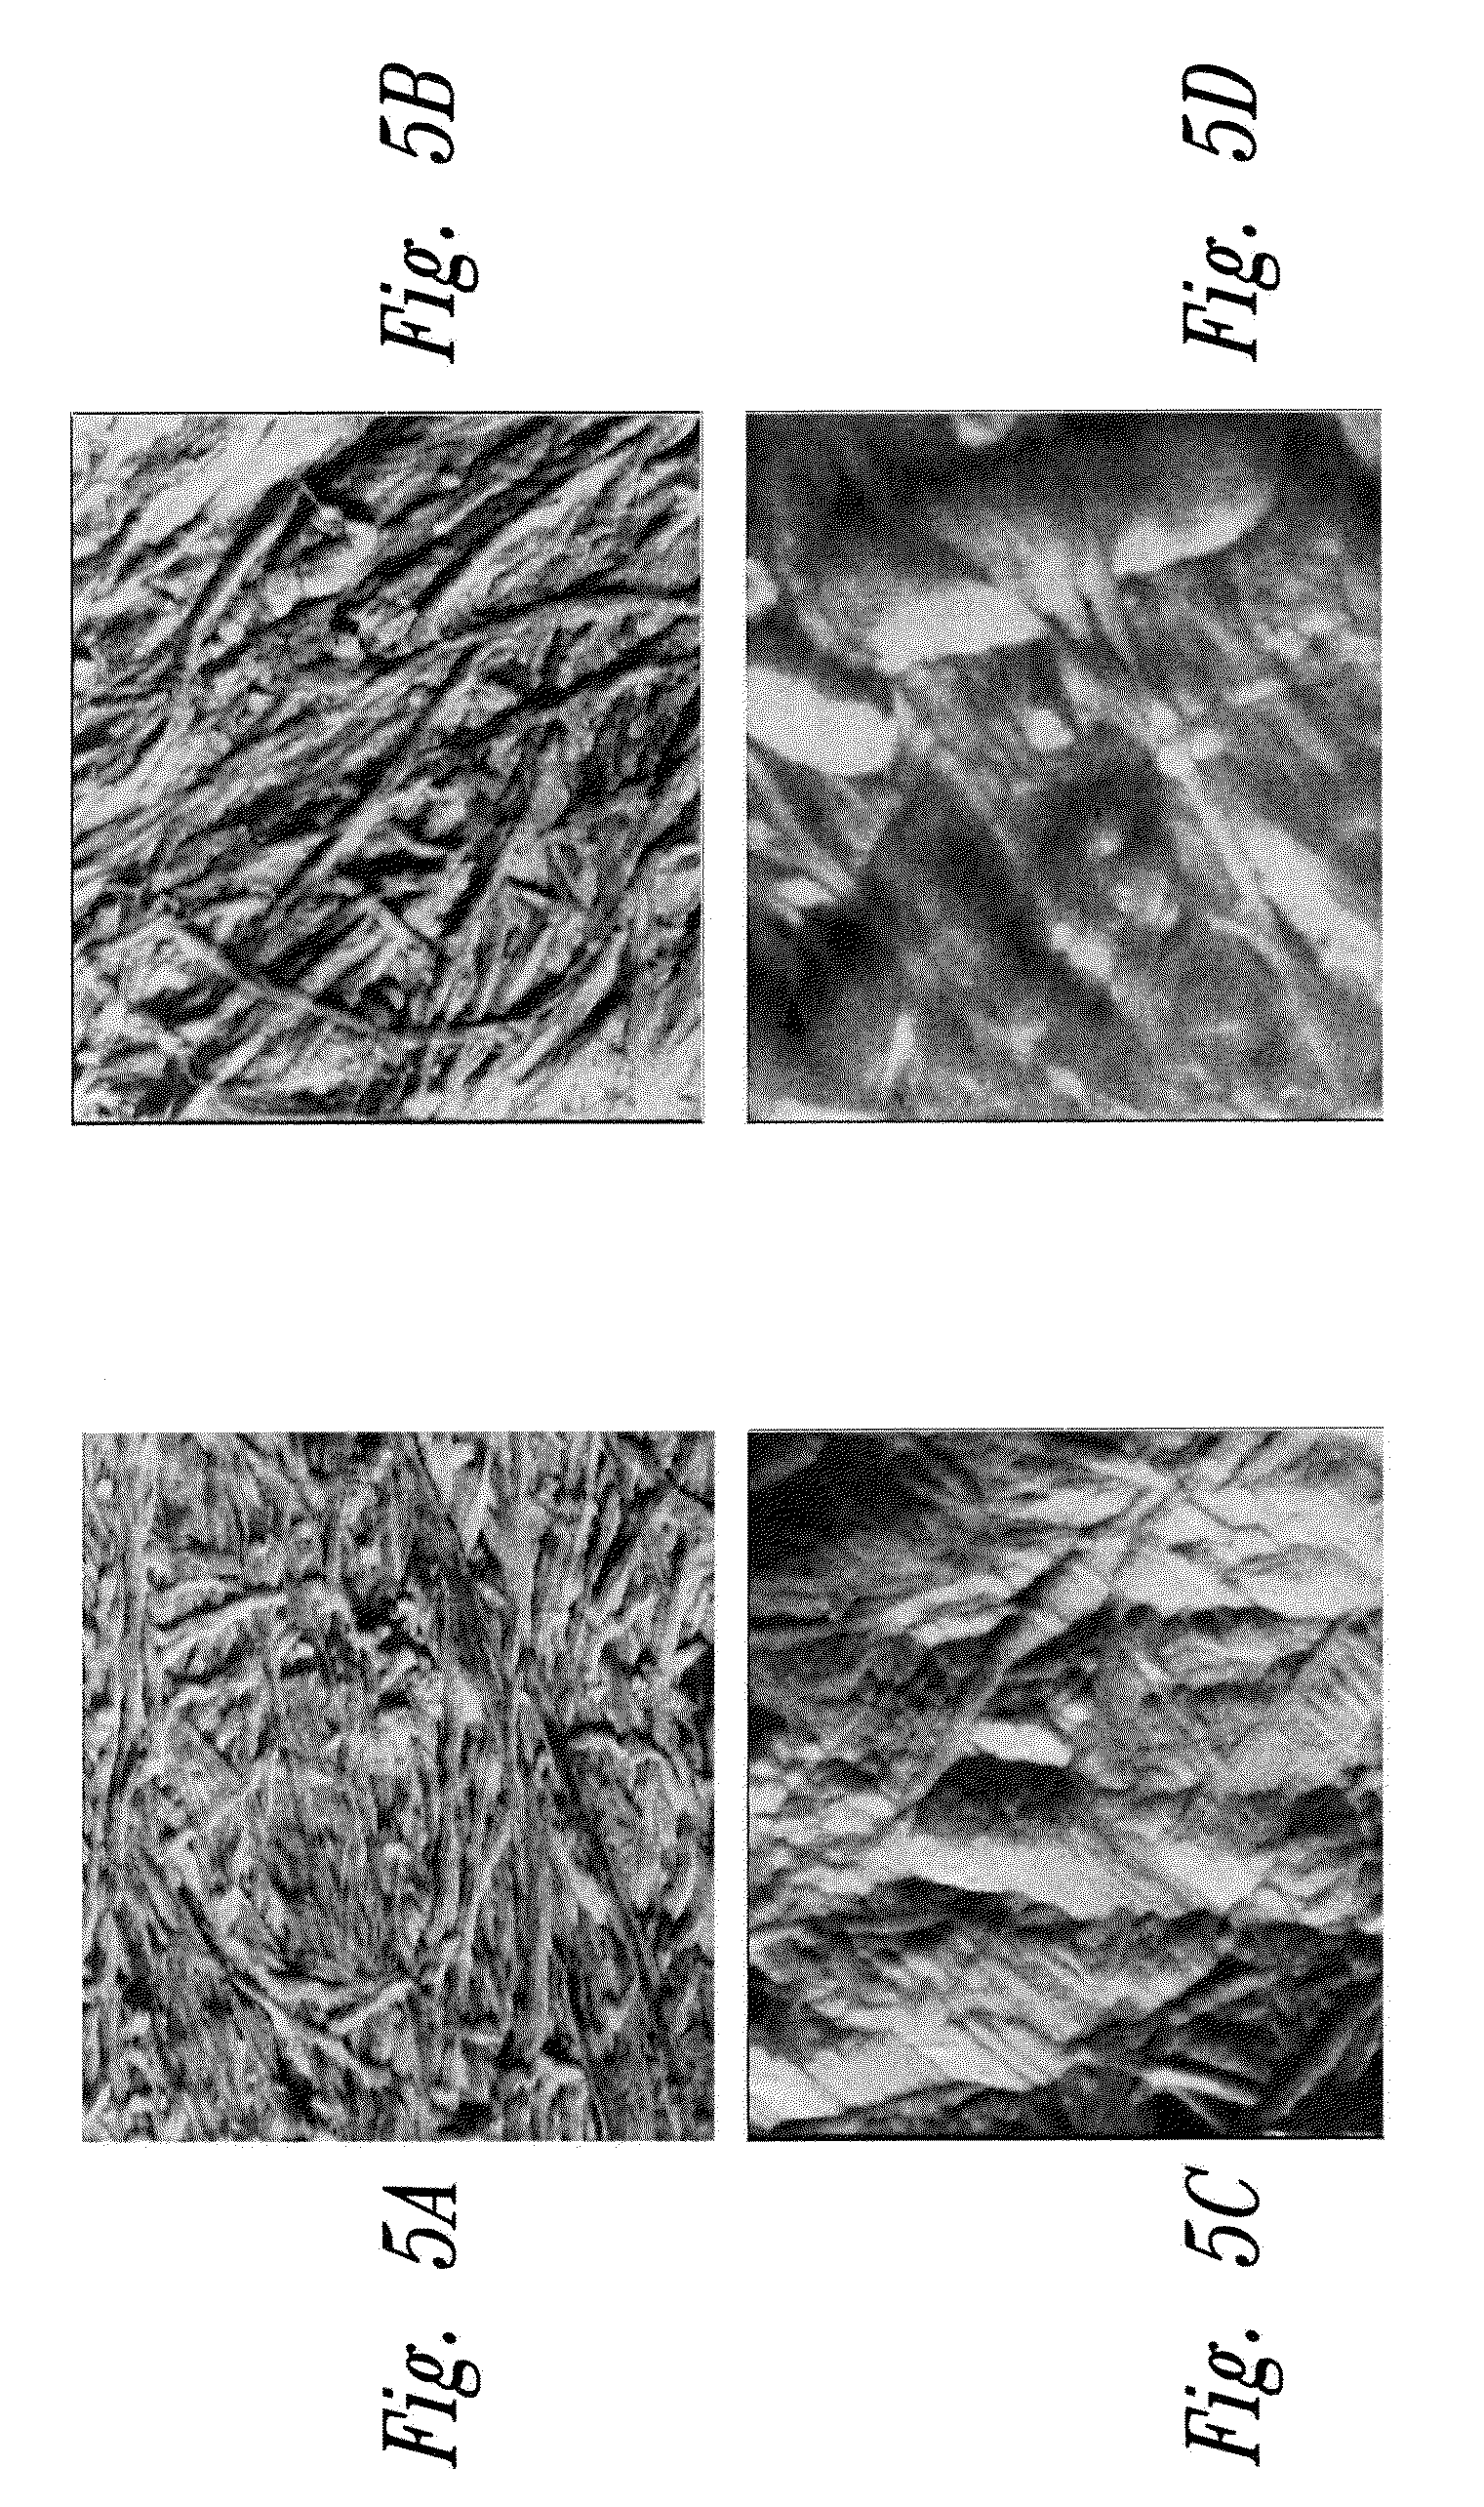 Method of in situ bioproduction and composition of bacterial cellulose nanocomposites